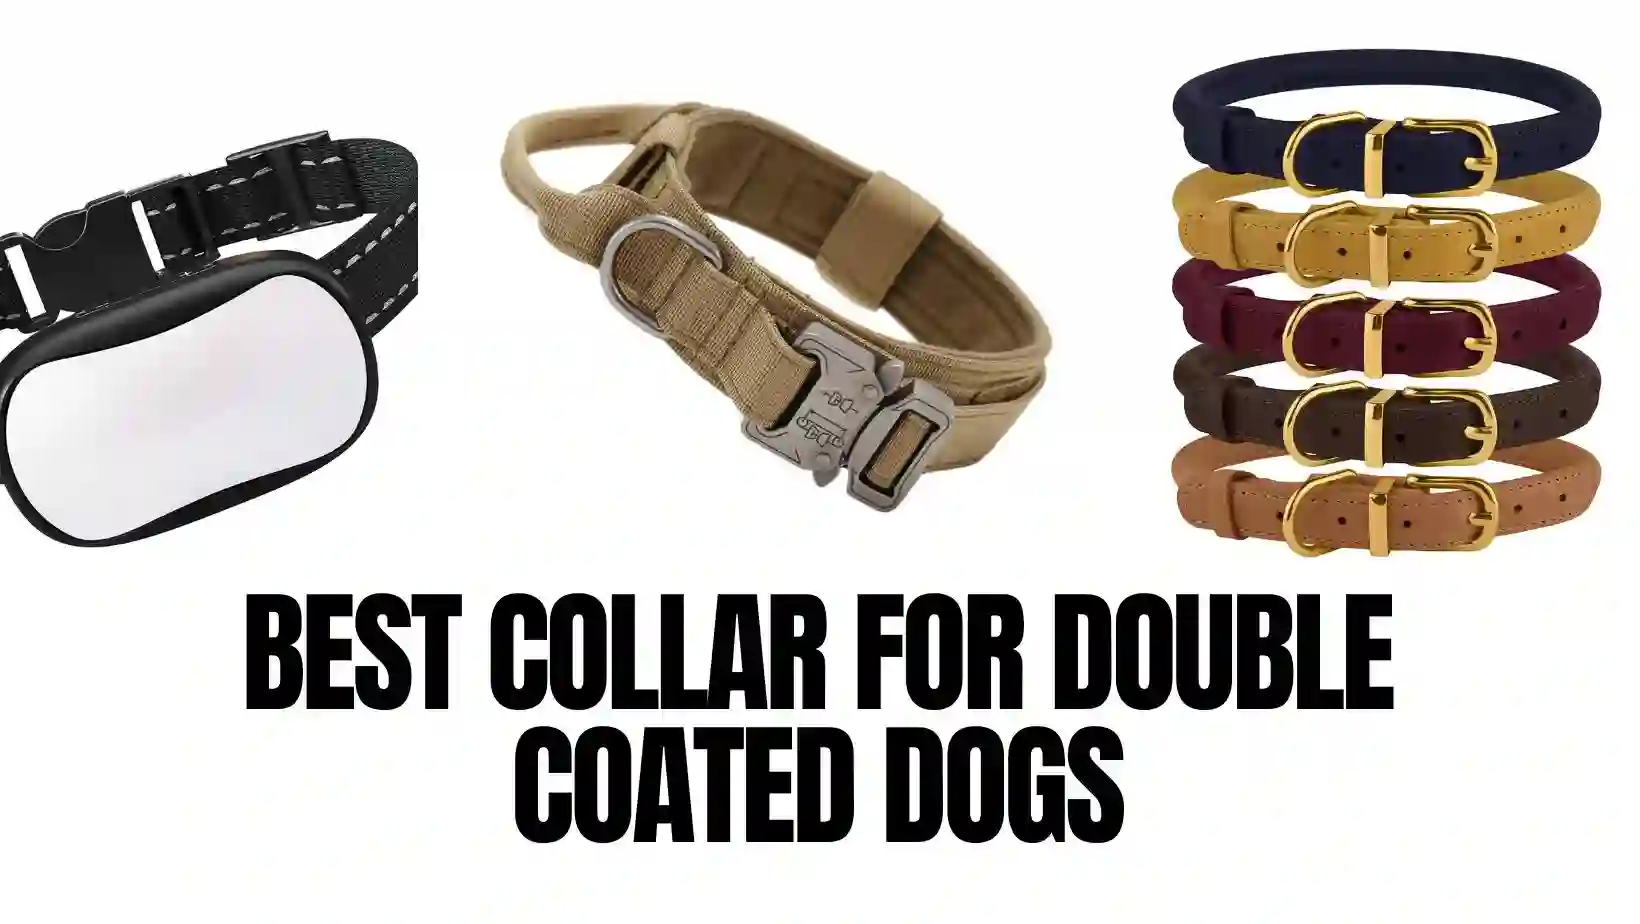 Best Collar for Double Coated Dogs